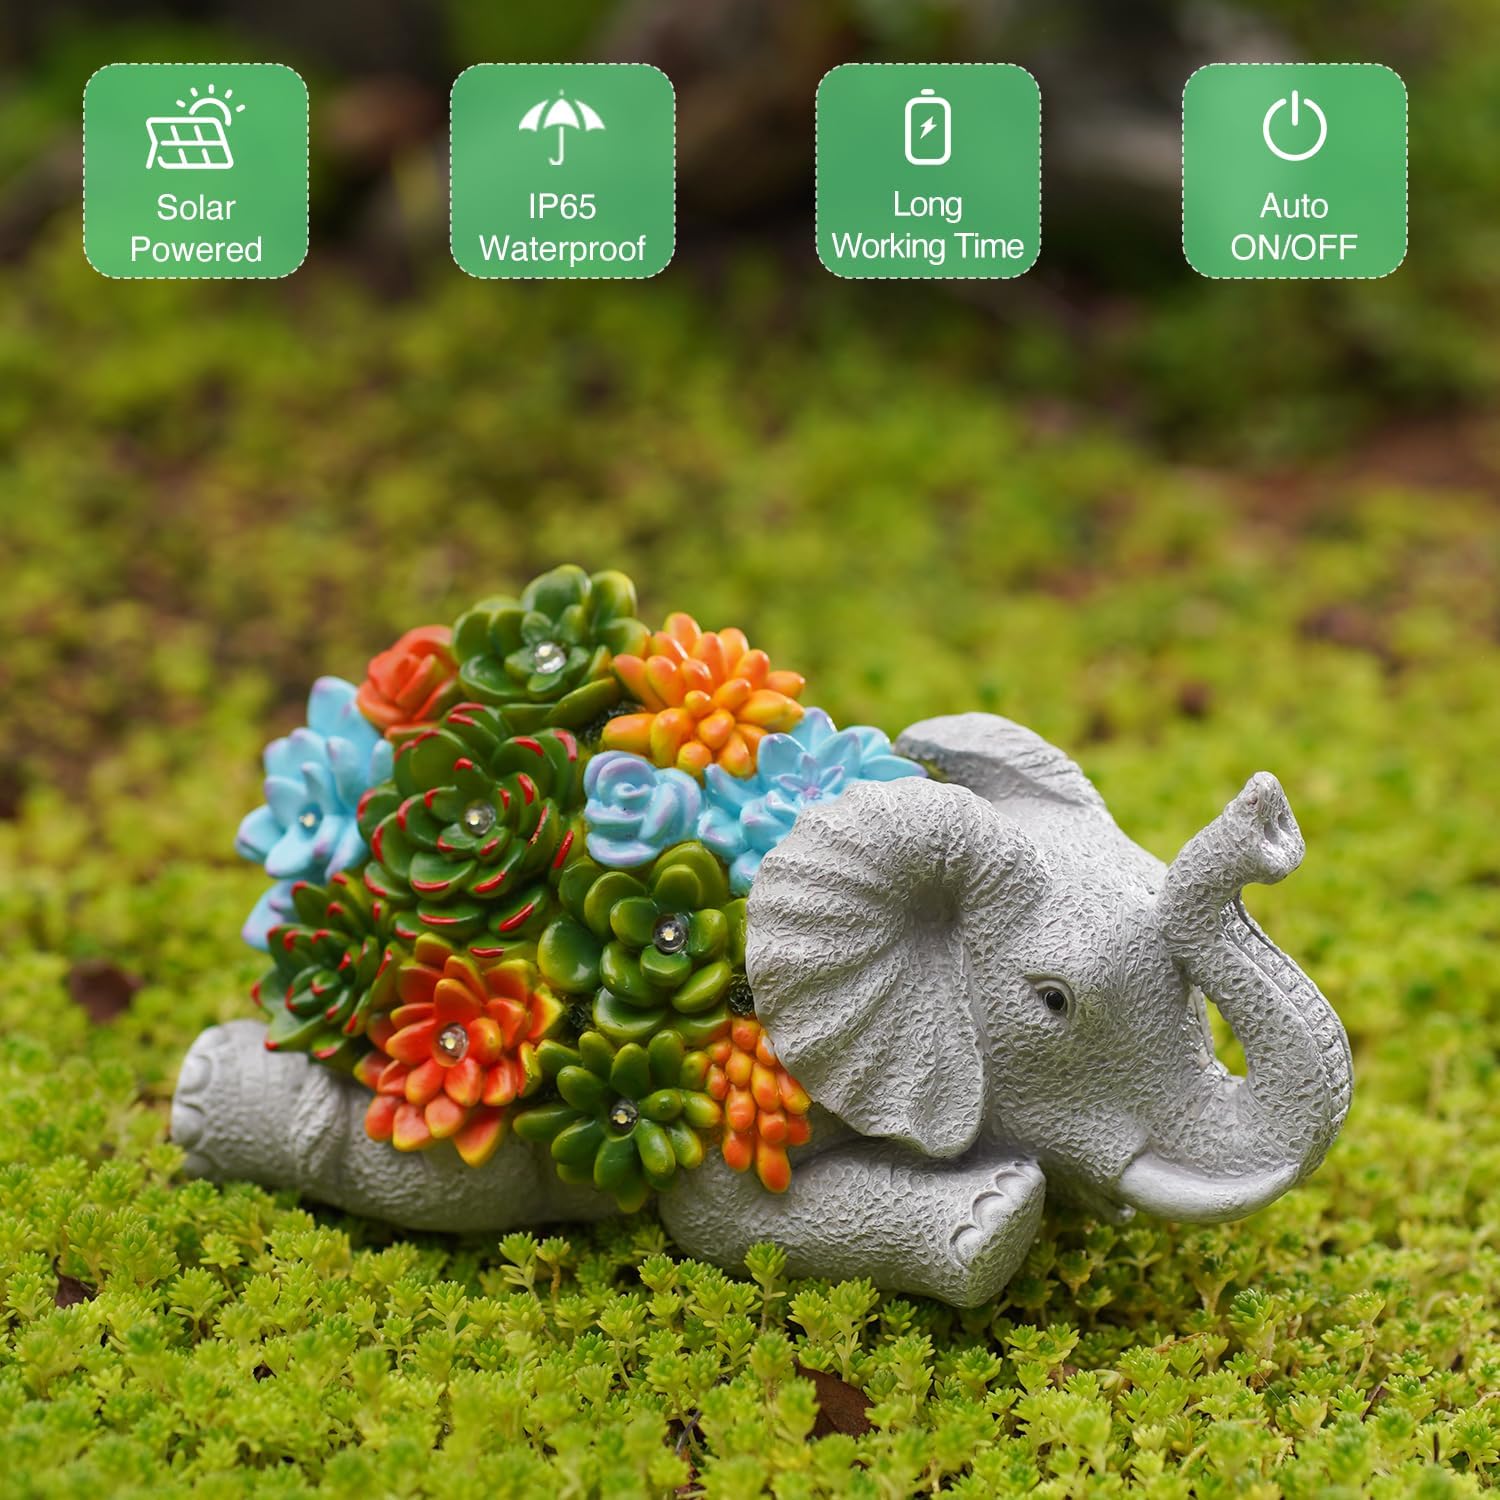 Elephant Statue Solar Garden Ornaments Outdoor Decor Waterproof Resin Elephant Figurines with Succulent 6 LED Solar Lights decoration for Home Yard Patio Lawn Elephant gifts for Women/Mum/Christmas 5